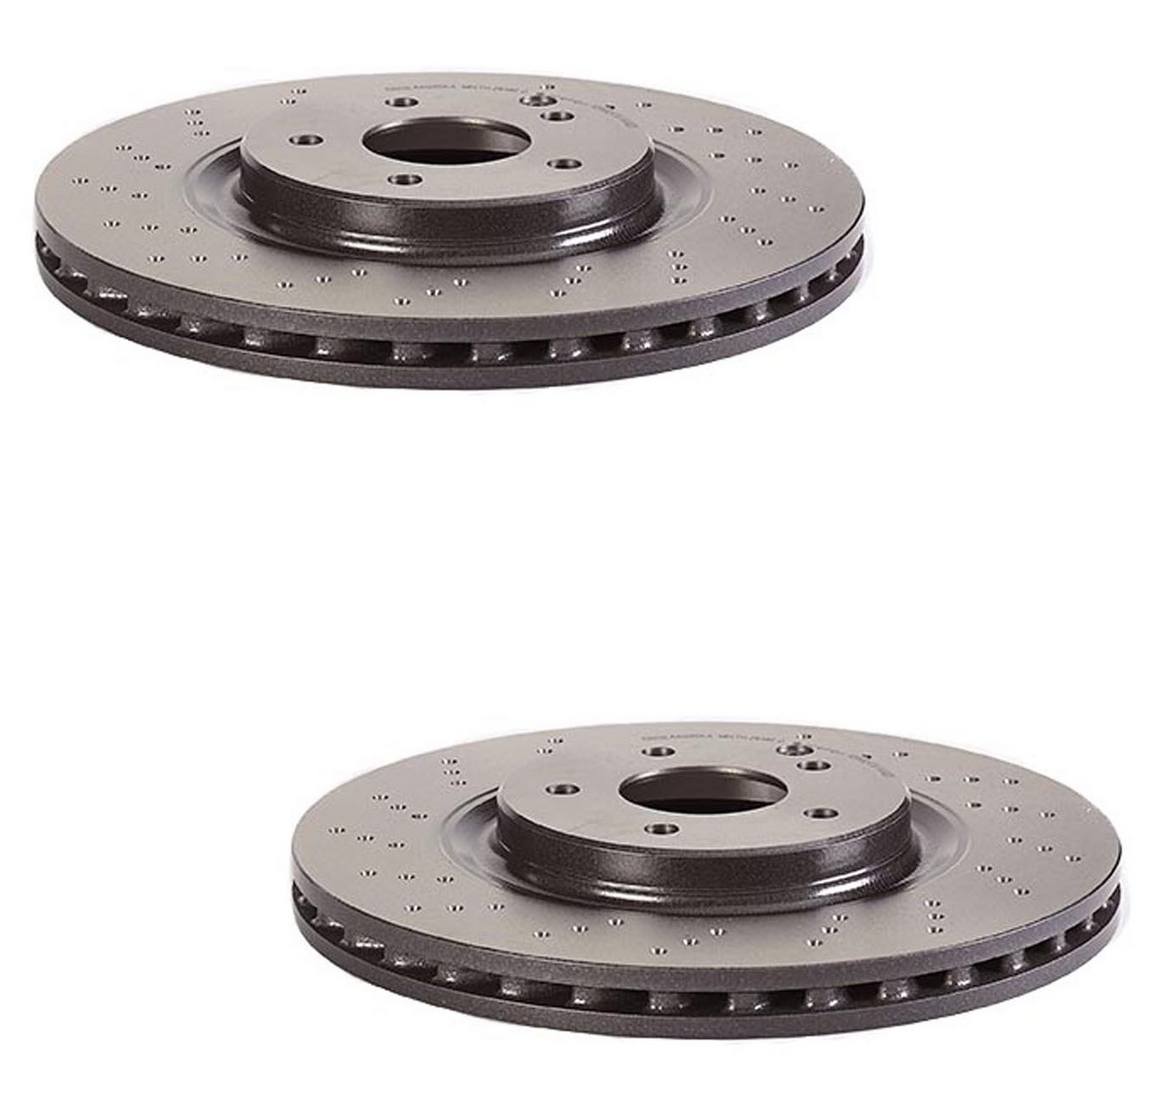 Brembo Brake Pads and Rotors Kit - Front and Rear (330mm/290mm) (Ceramic)